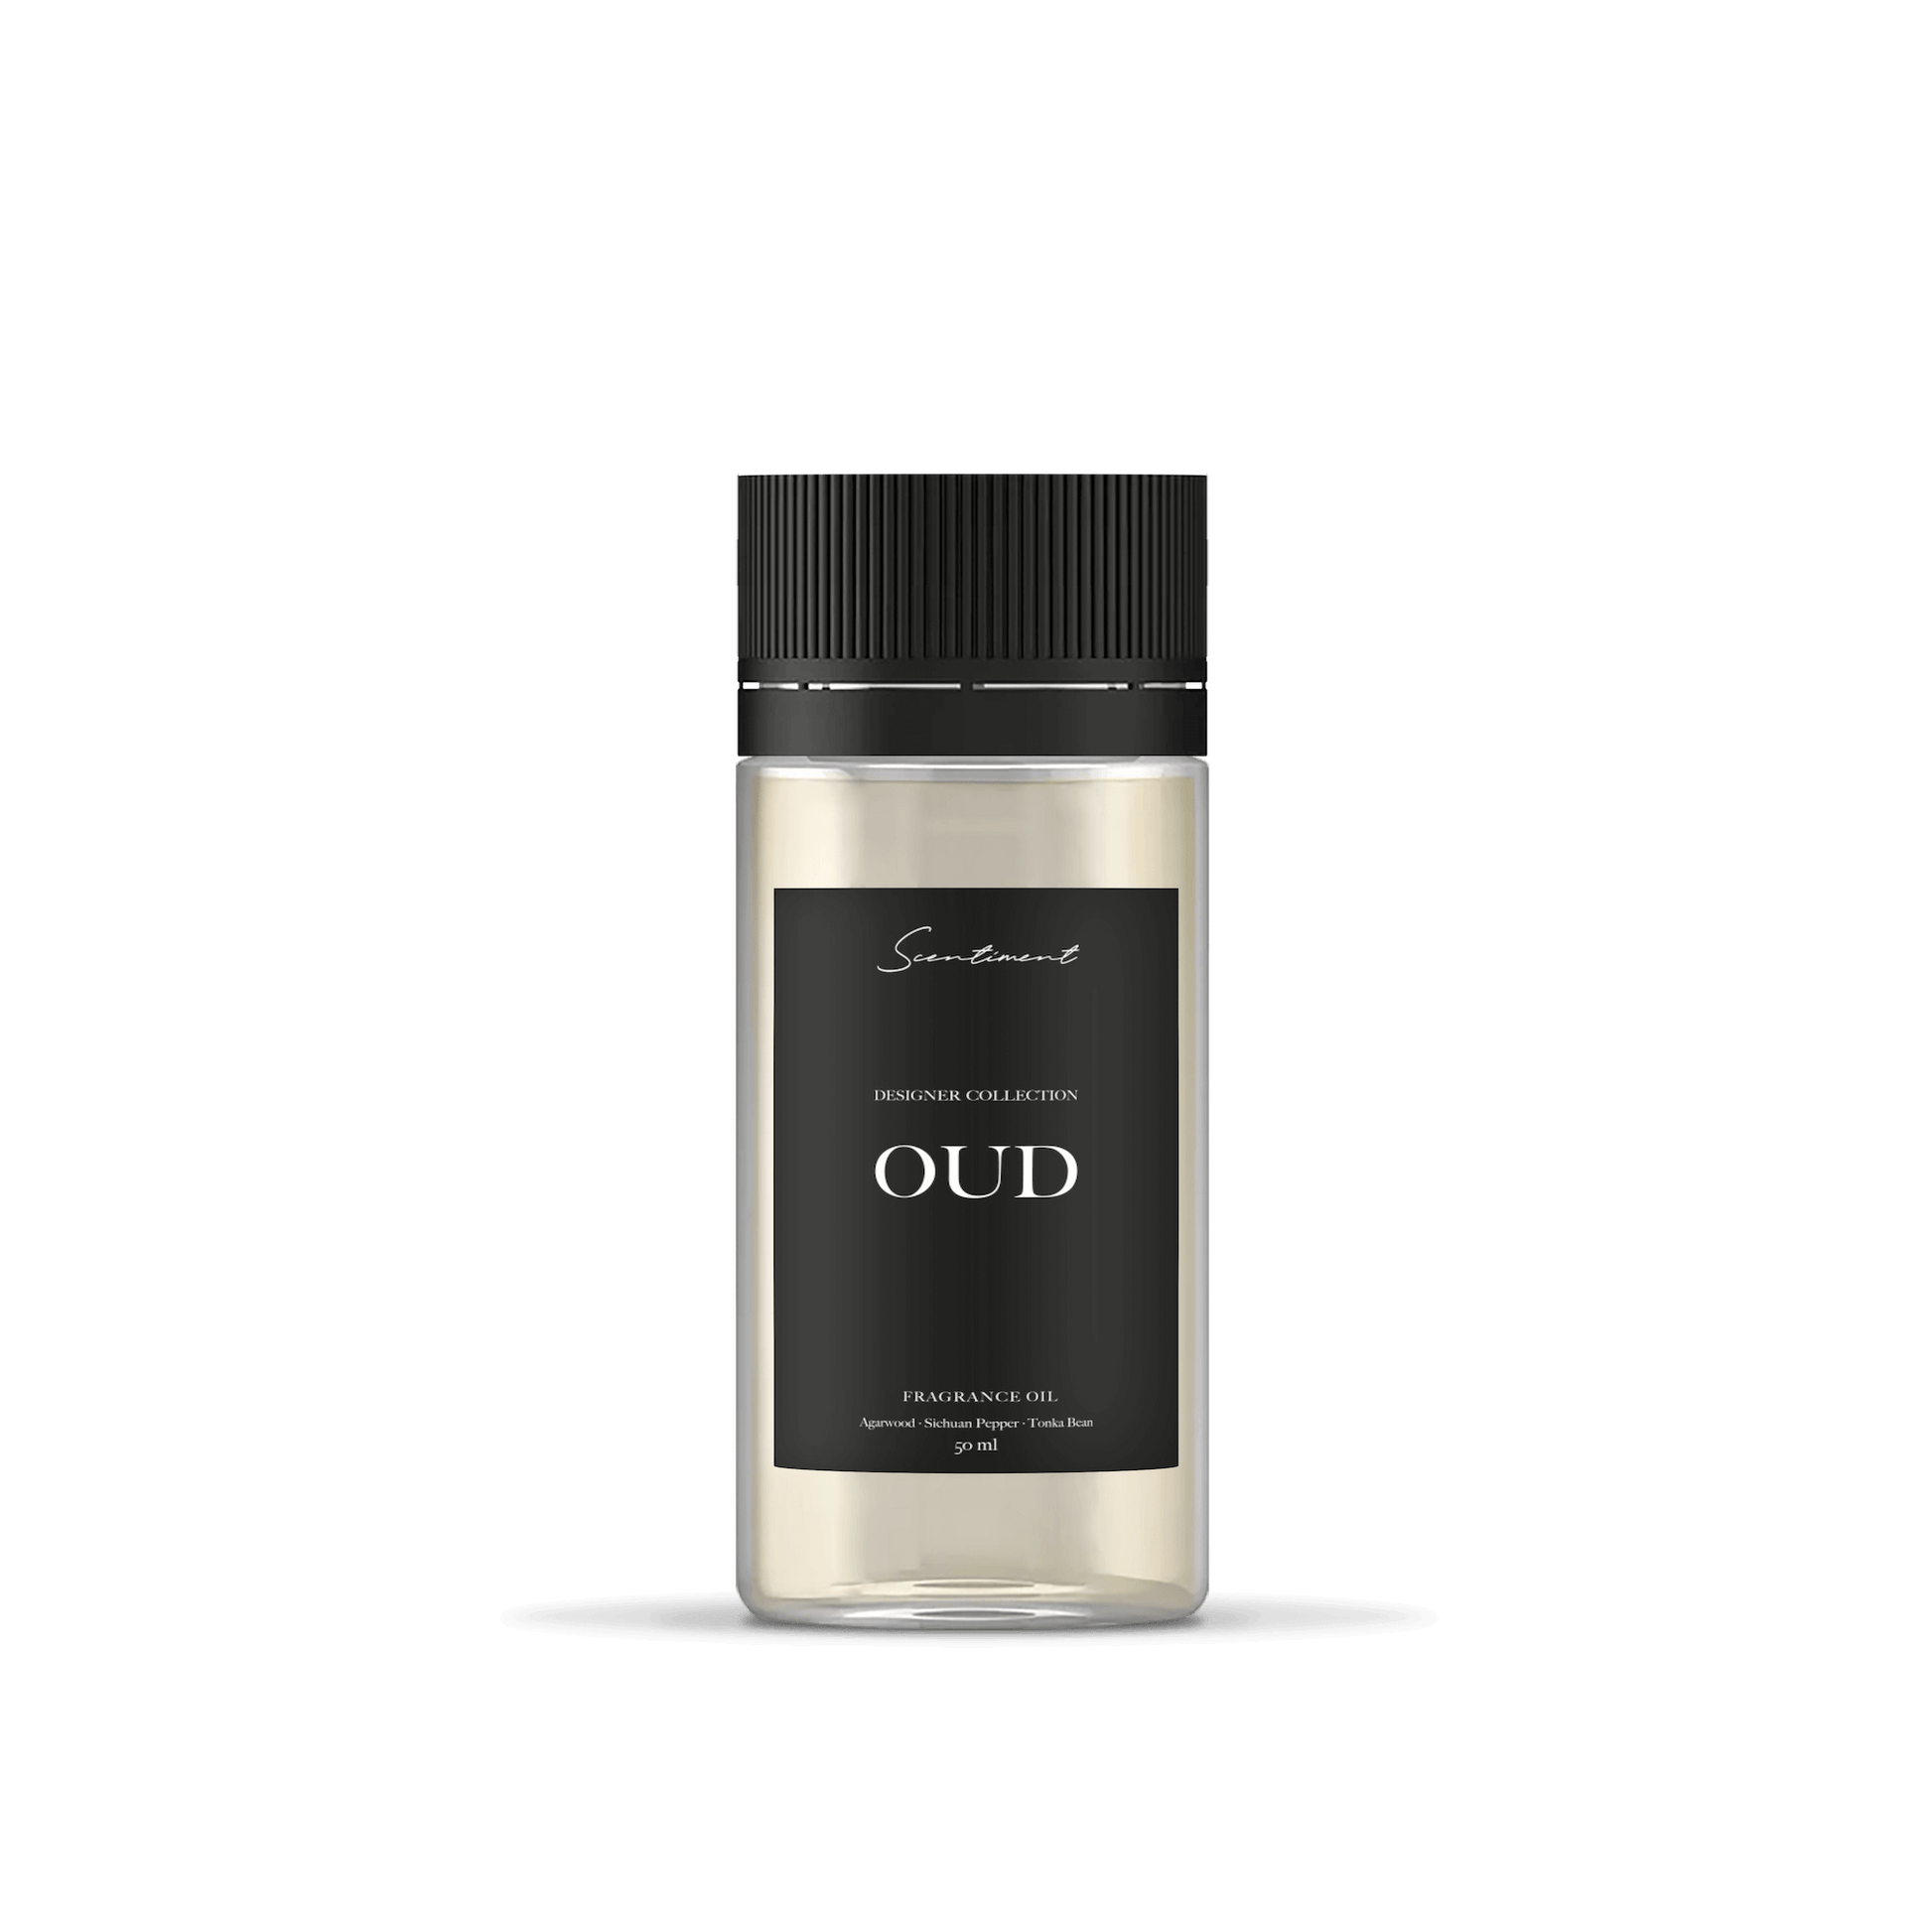 Oud 50ml Fragrance Oil, Inspired by Tom Ford® Oud Wood